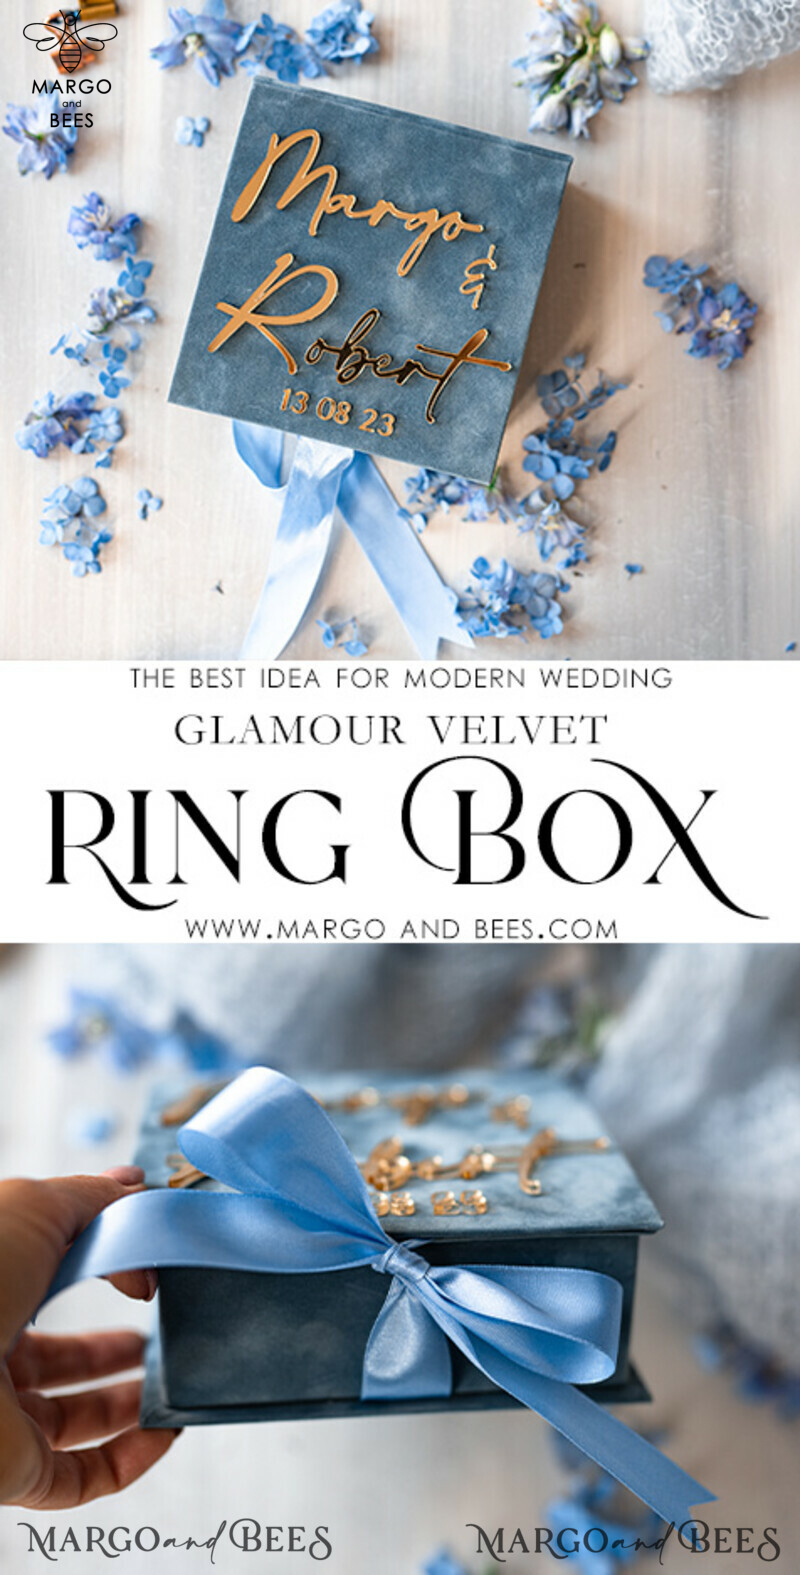 Dusty Blue and Golden Velvet Wedding Ring Box: A Perfect Ceremony Essential for Your Special Day

Elevate Your Wedding Ceremony with a Luxurious Dusty Blue and Golden Velvet Ring Box, Perfect for Holding 3 Rings

Add a Touch of Boho Glam to Your Wedding with His and Hers Velvet Ring Boxes

Customize Your Luxury Velvet Ring Box with Double the Elegance and Choose Your Preferred Colors-3